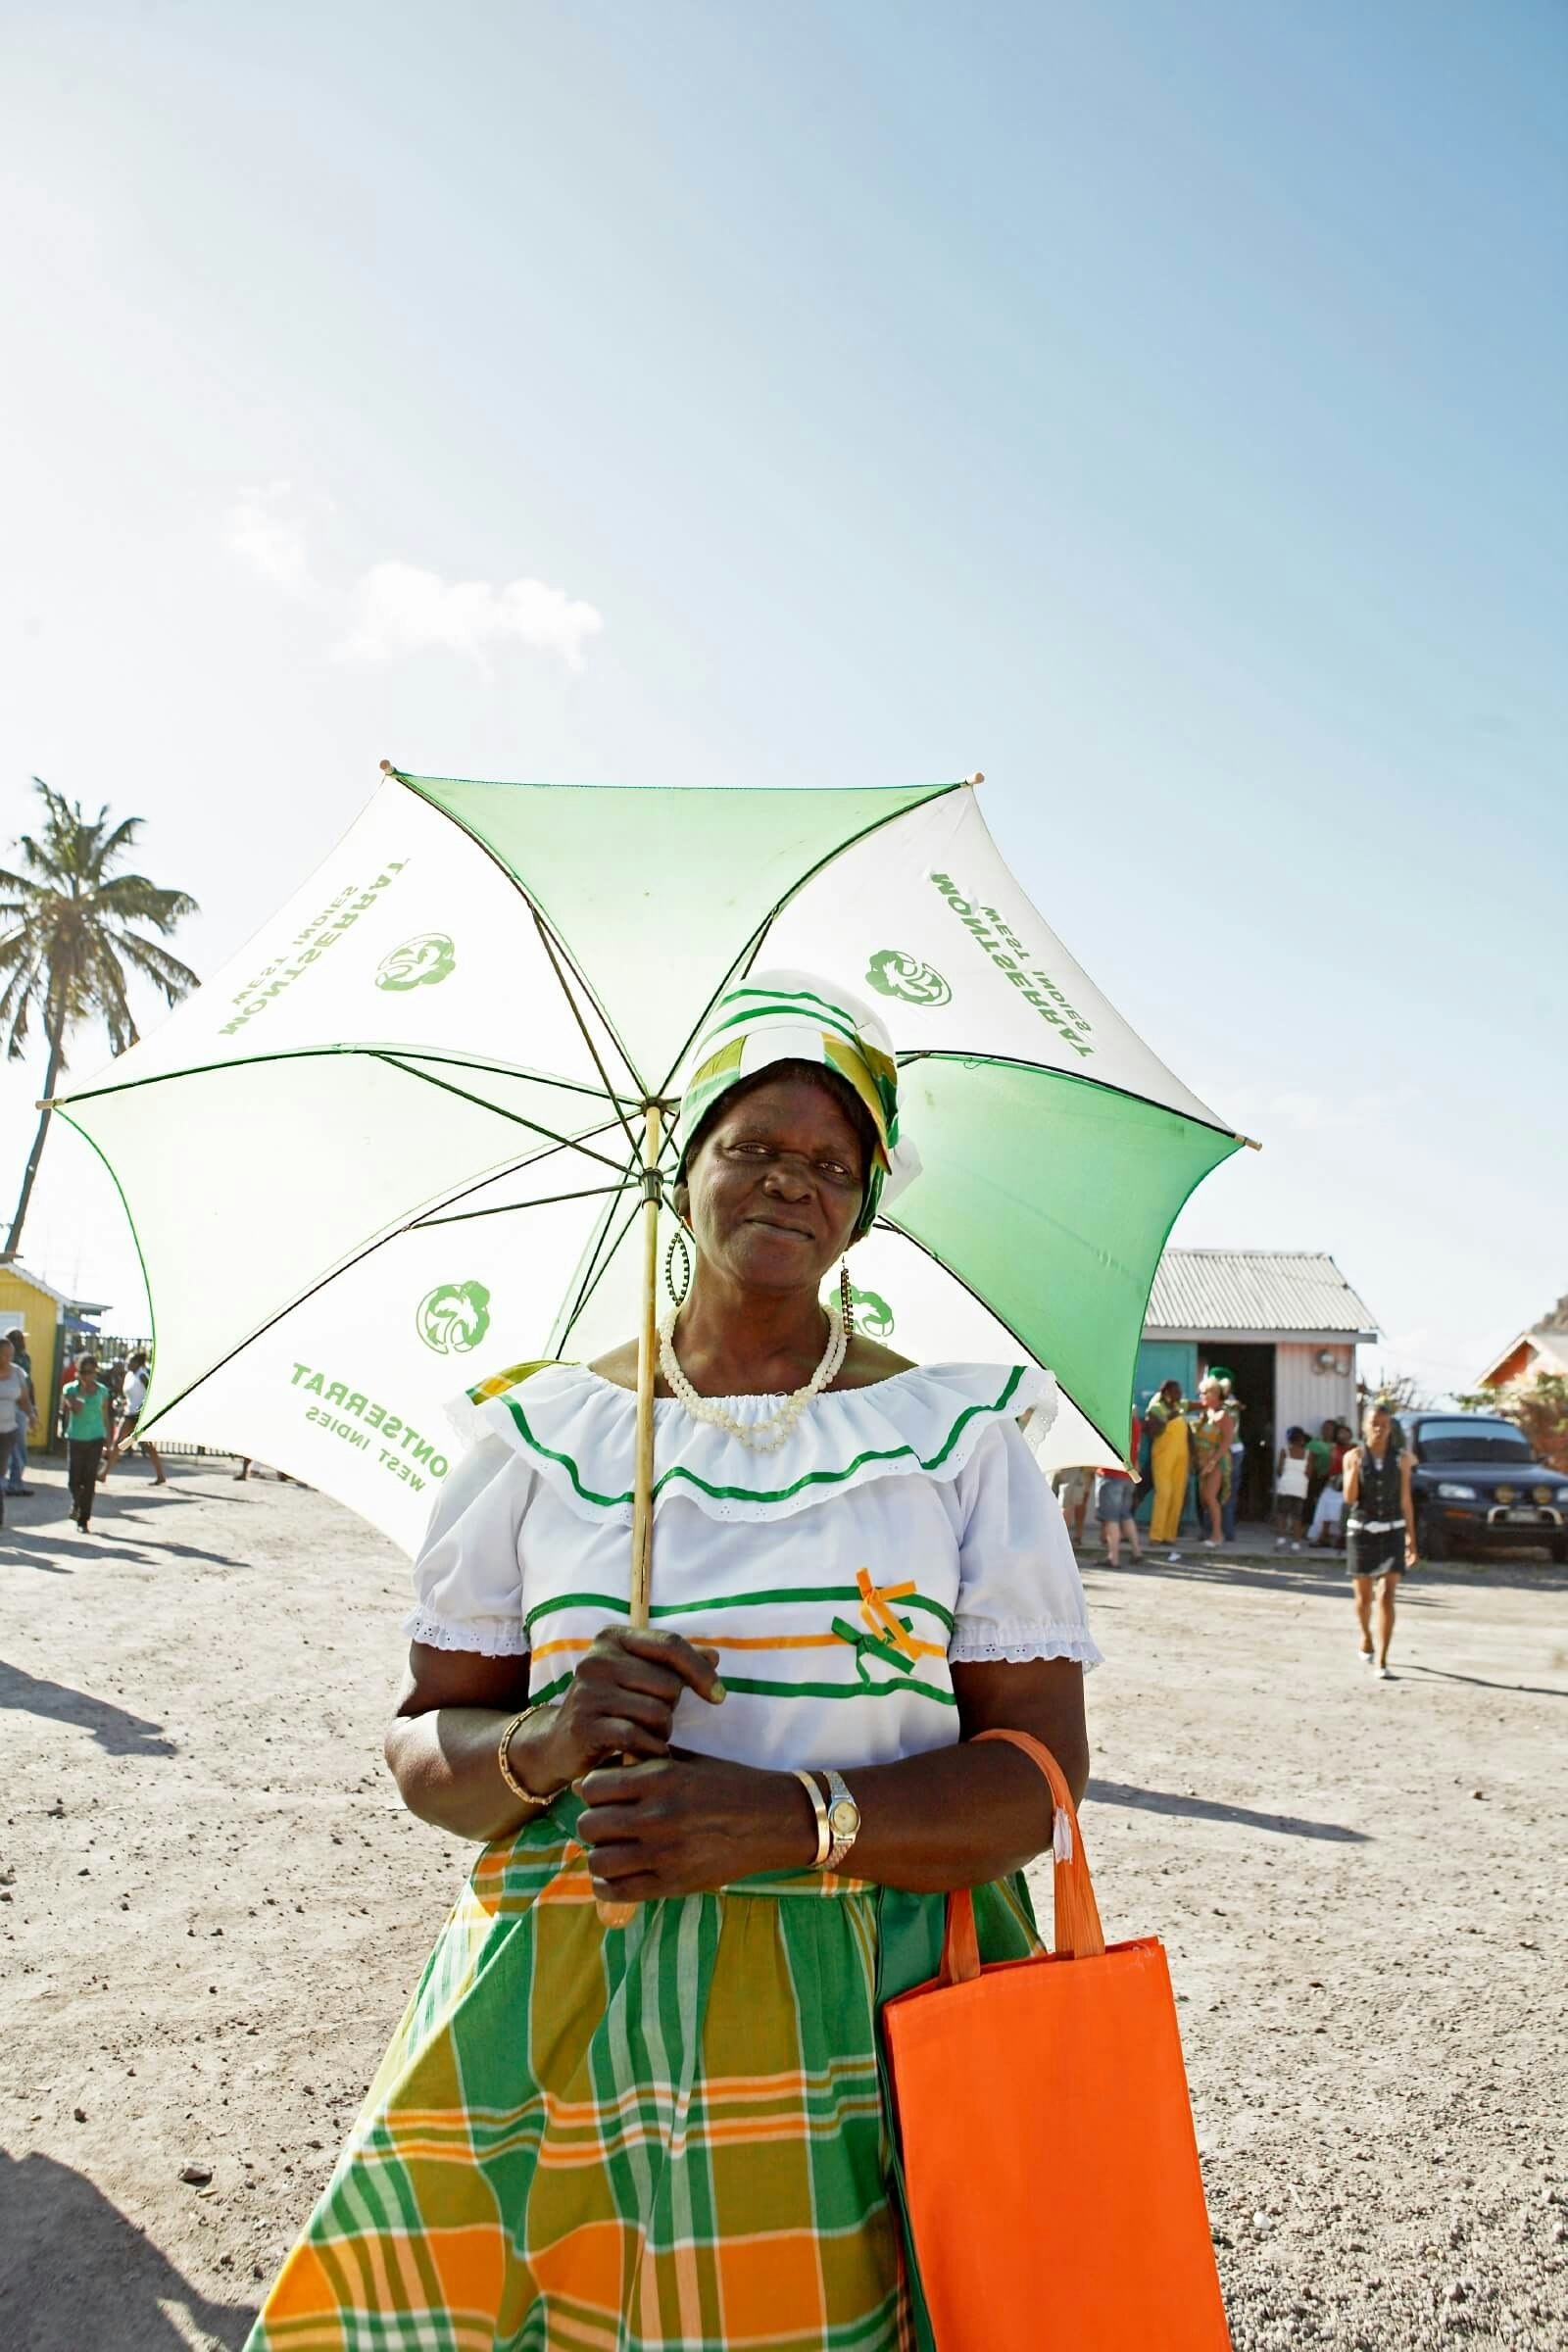 A woman dressed in orange, white and green holding a green and white umbrella on the beach on a sunny day